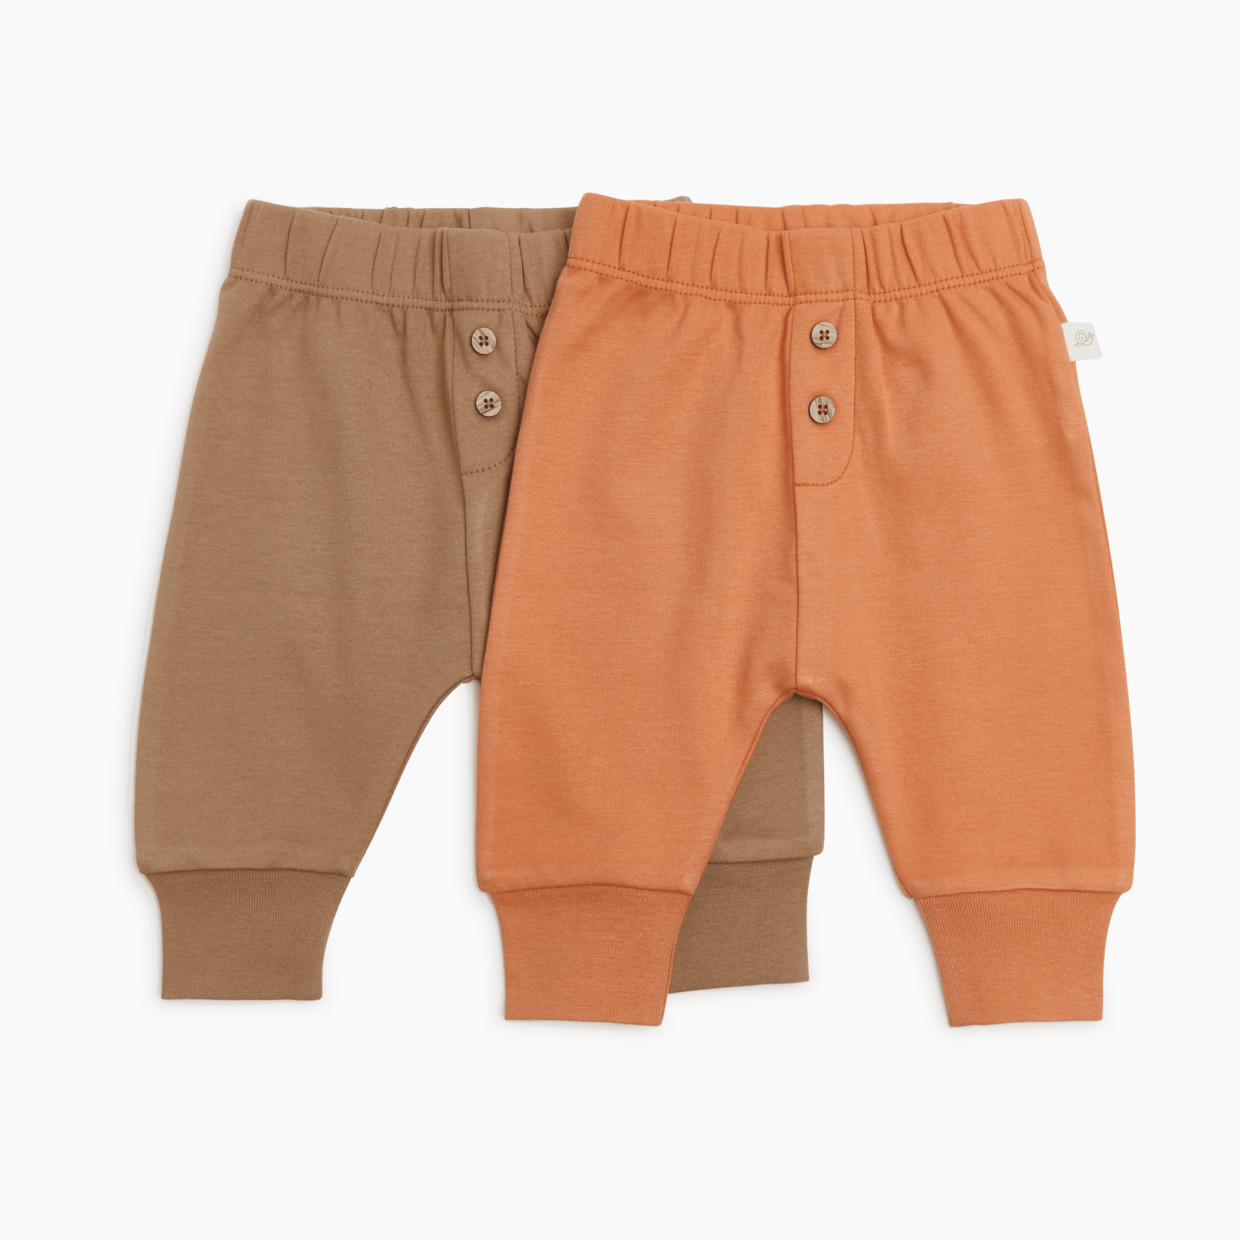 Tiny Kind 2 Pack Pants - Neutral Pack, 9-12 M.